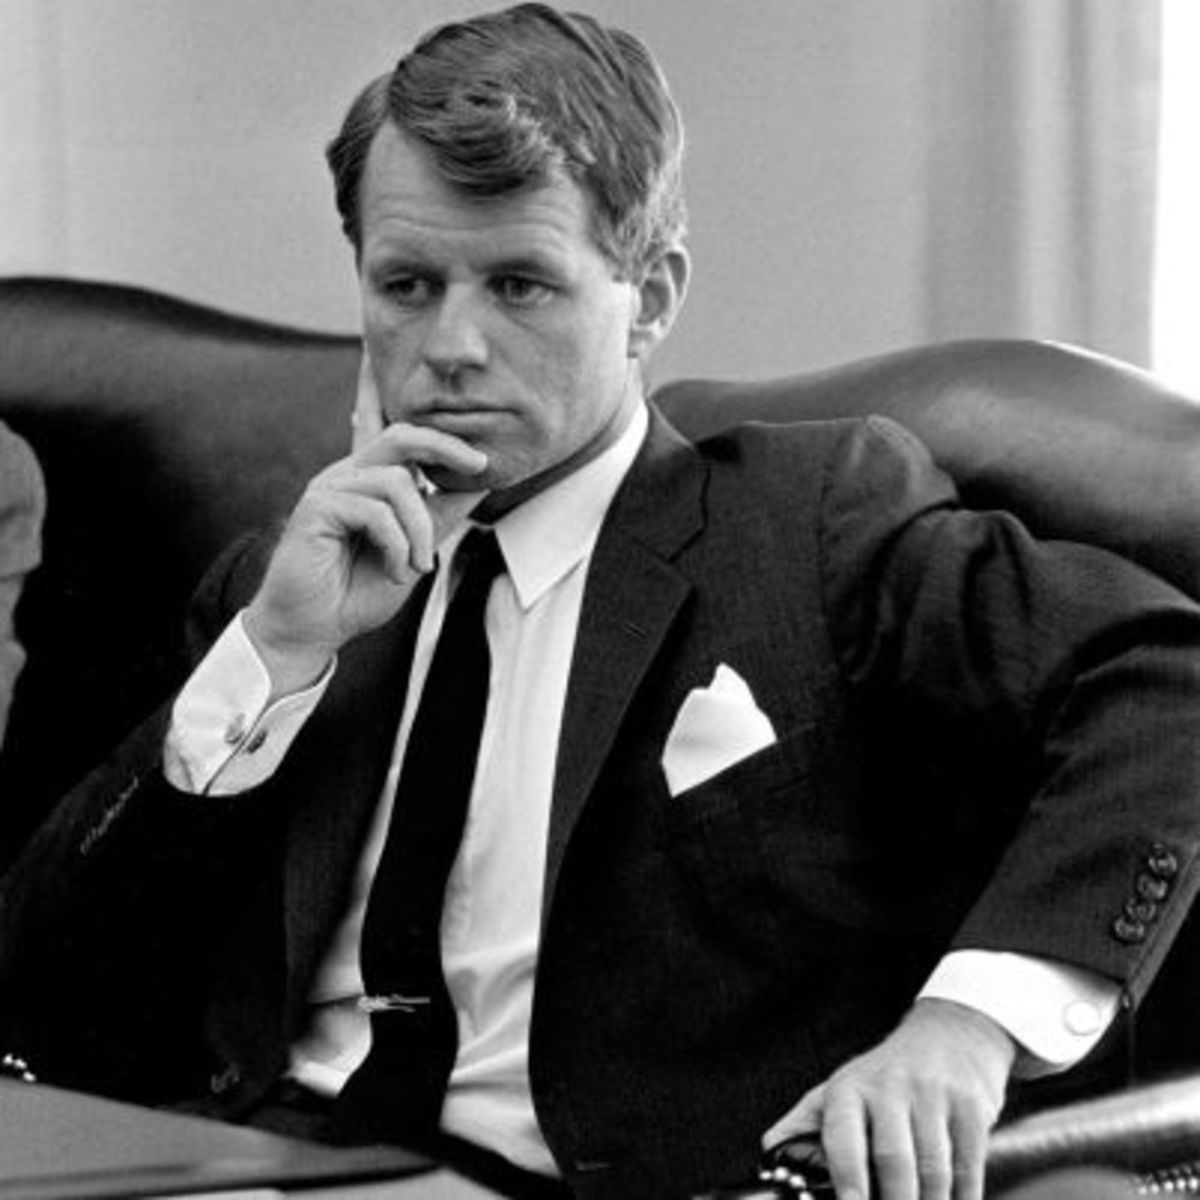 Hoffa’s analysis of Kennedy wasn’tmuch different: "Robert F. Kennedy was a man who always made abig thing out of how strong and how tough he was,howhe had been a football playeror something at Harvard, and how he always exercised and kept himself in top shape..."